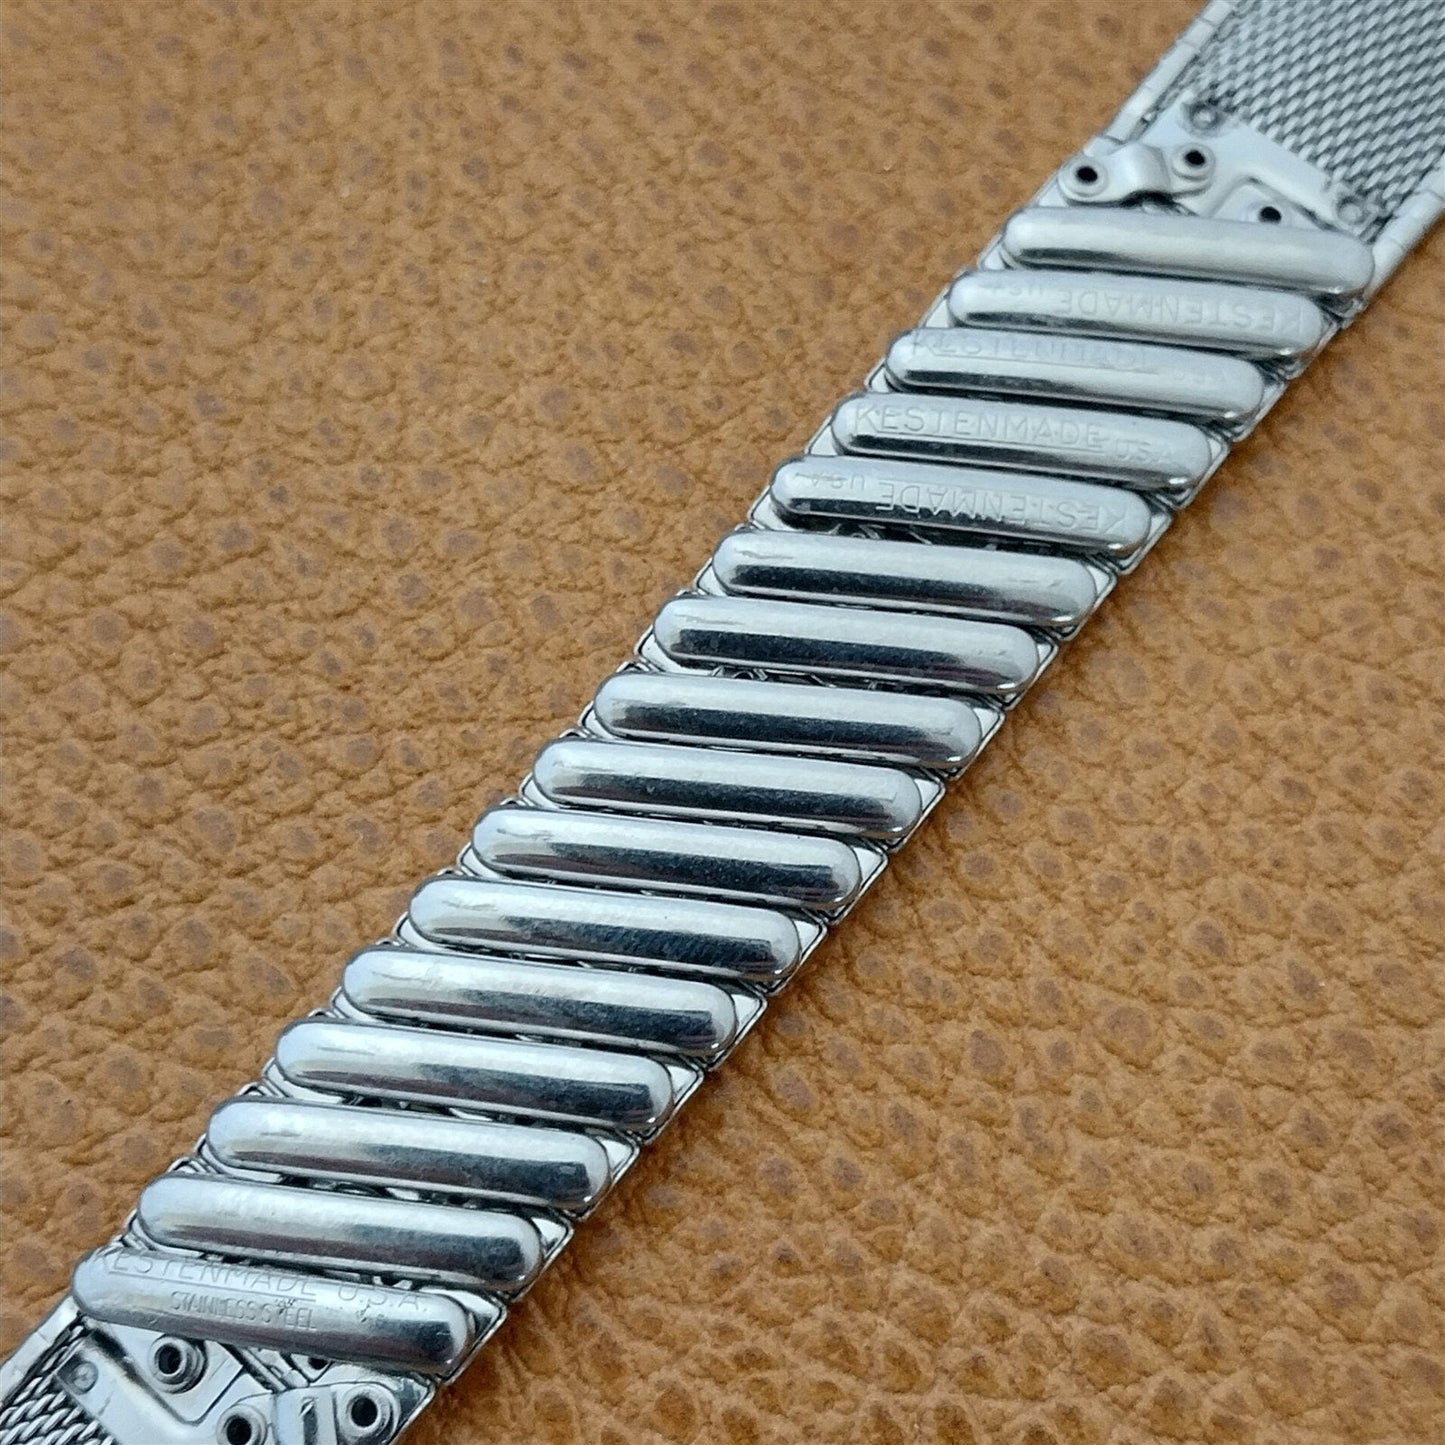 Kestenmade Stainless Steel Expansion nos 18mm 19mm 1960s Vintage Watch Band